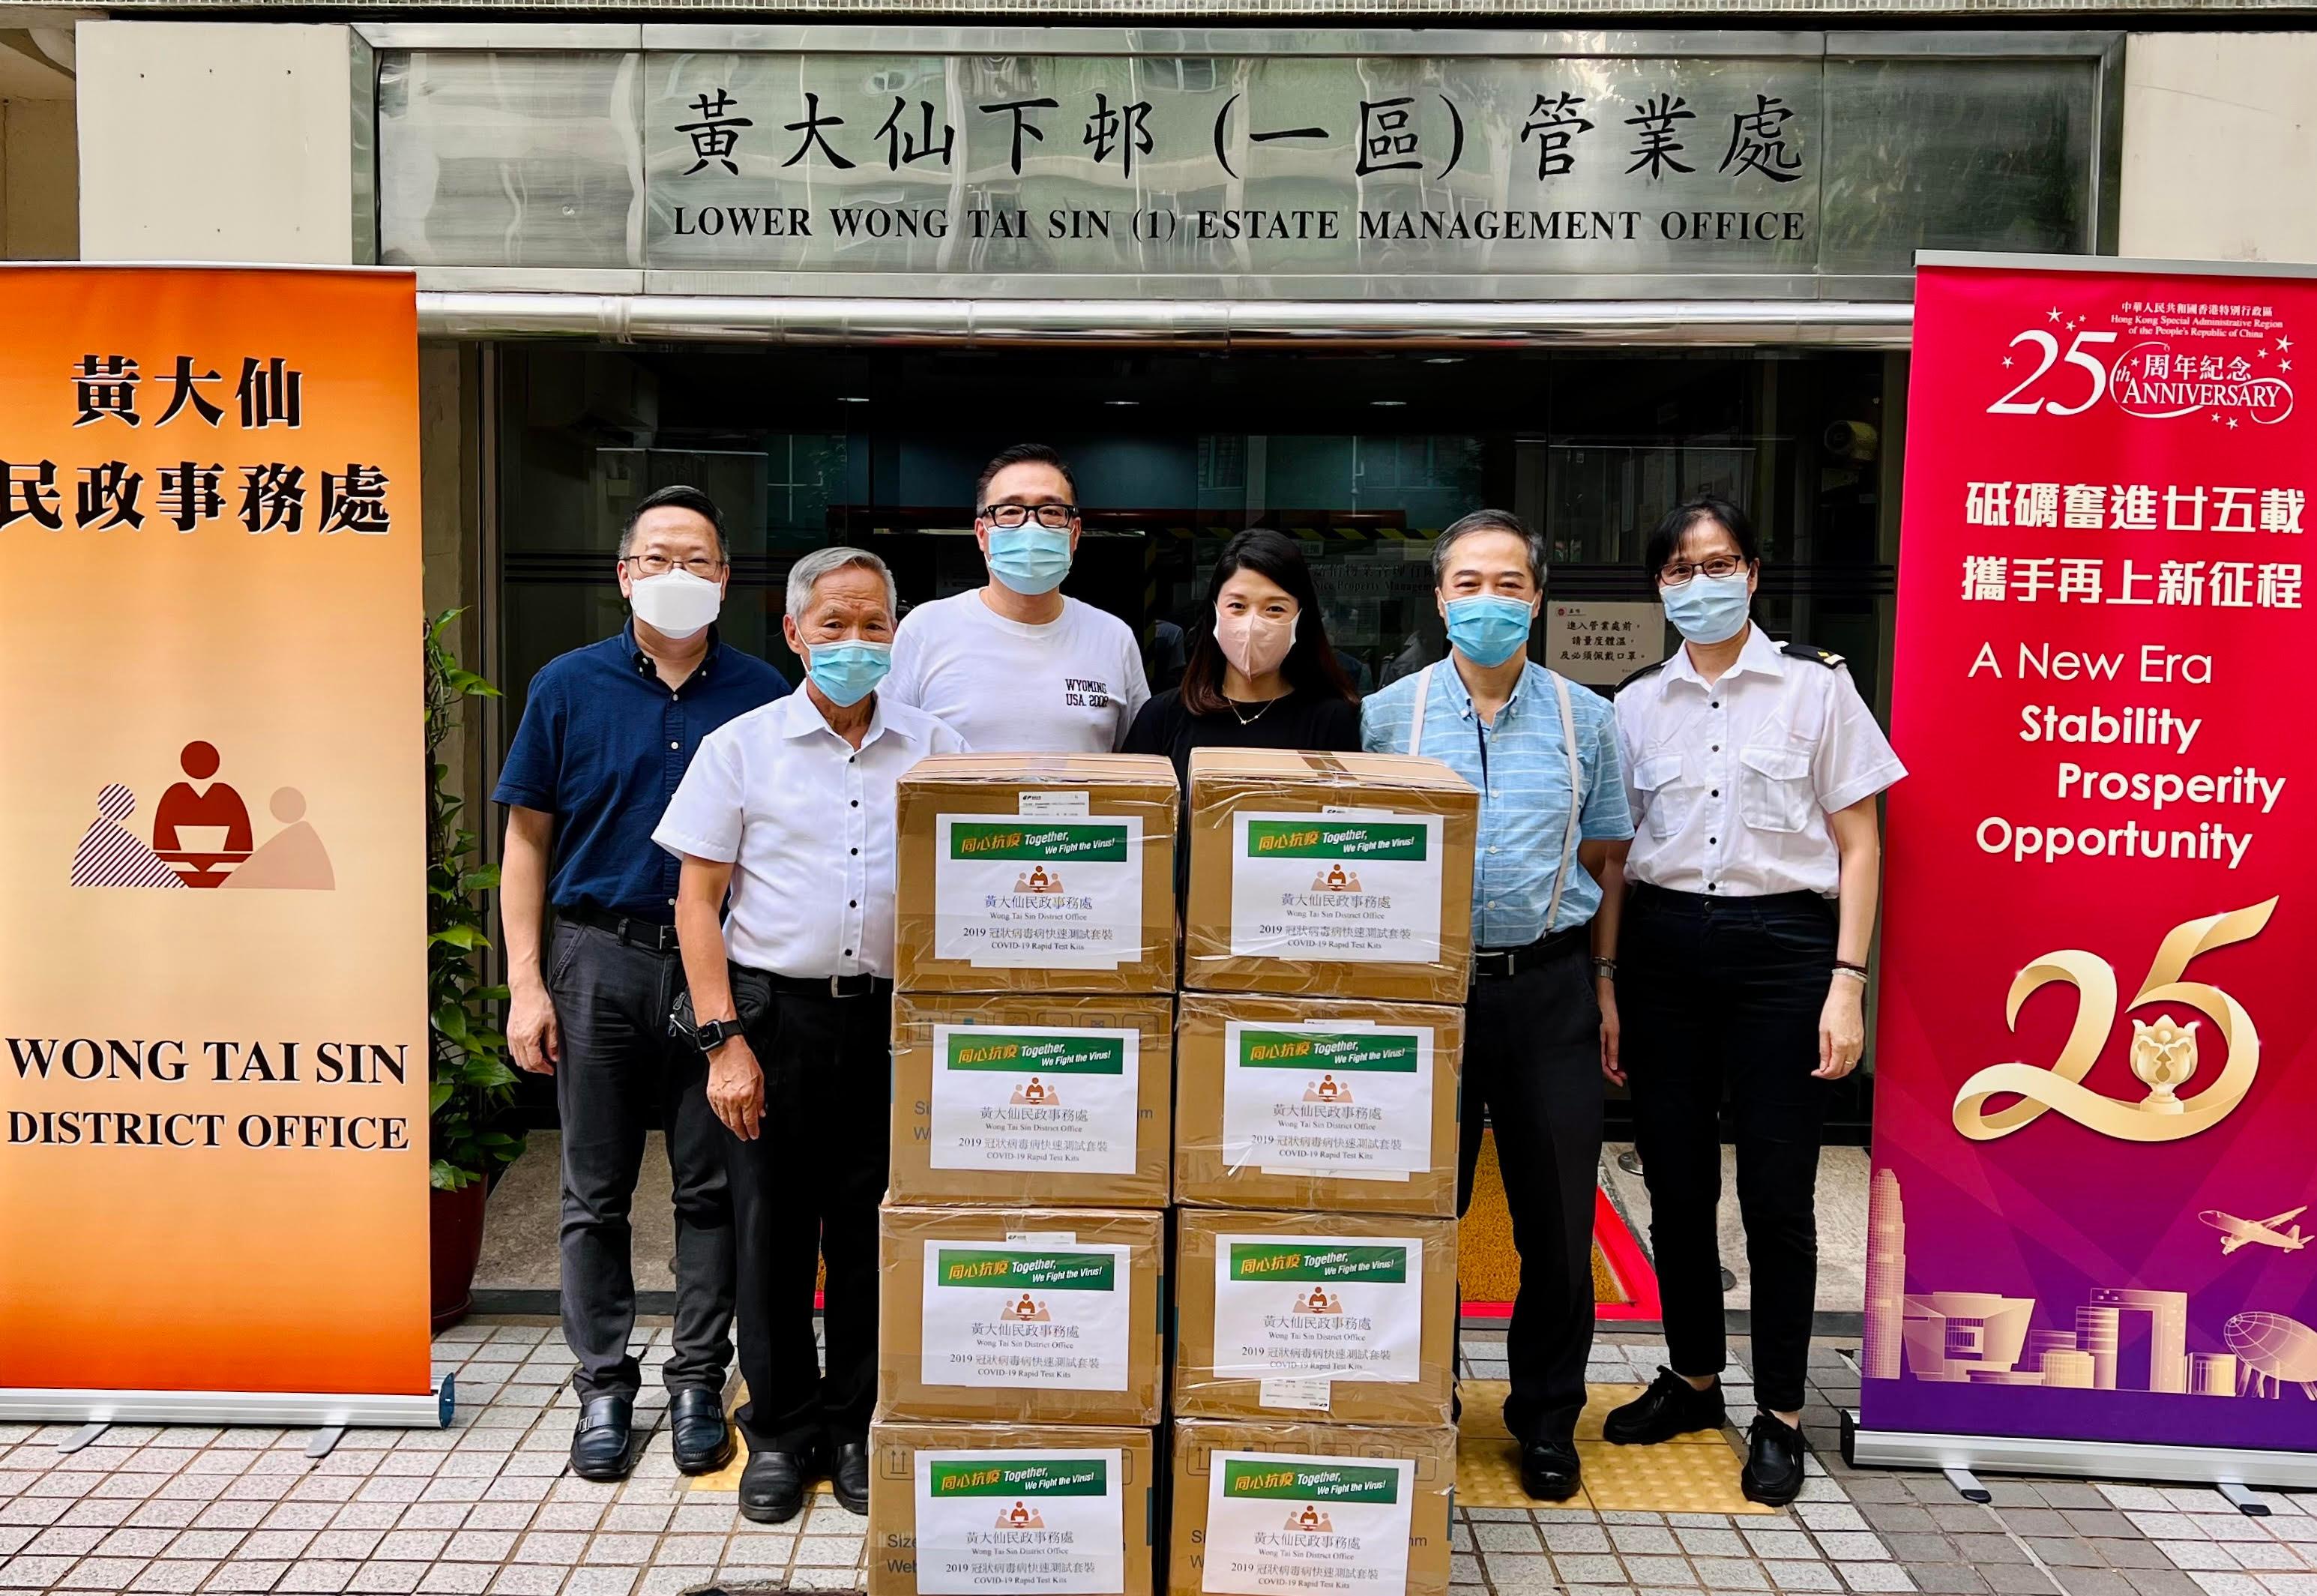 The Wong Tai Sin District Office today (July 15) distributed COVID-19 rapid test kits to households, cleansing workers and property management staff living and working in Lower Wong Tai Sin (1) Estate for voluntary testing through the property management company.


